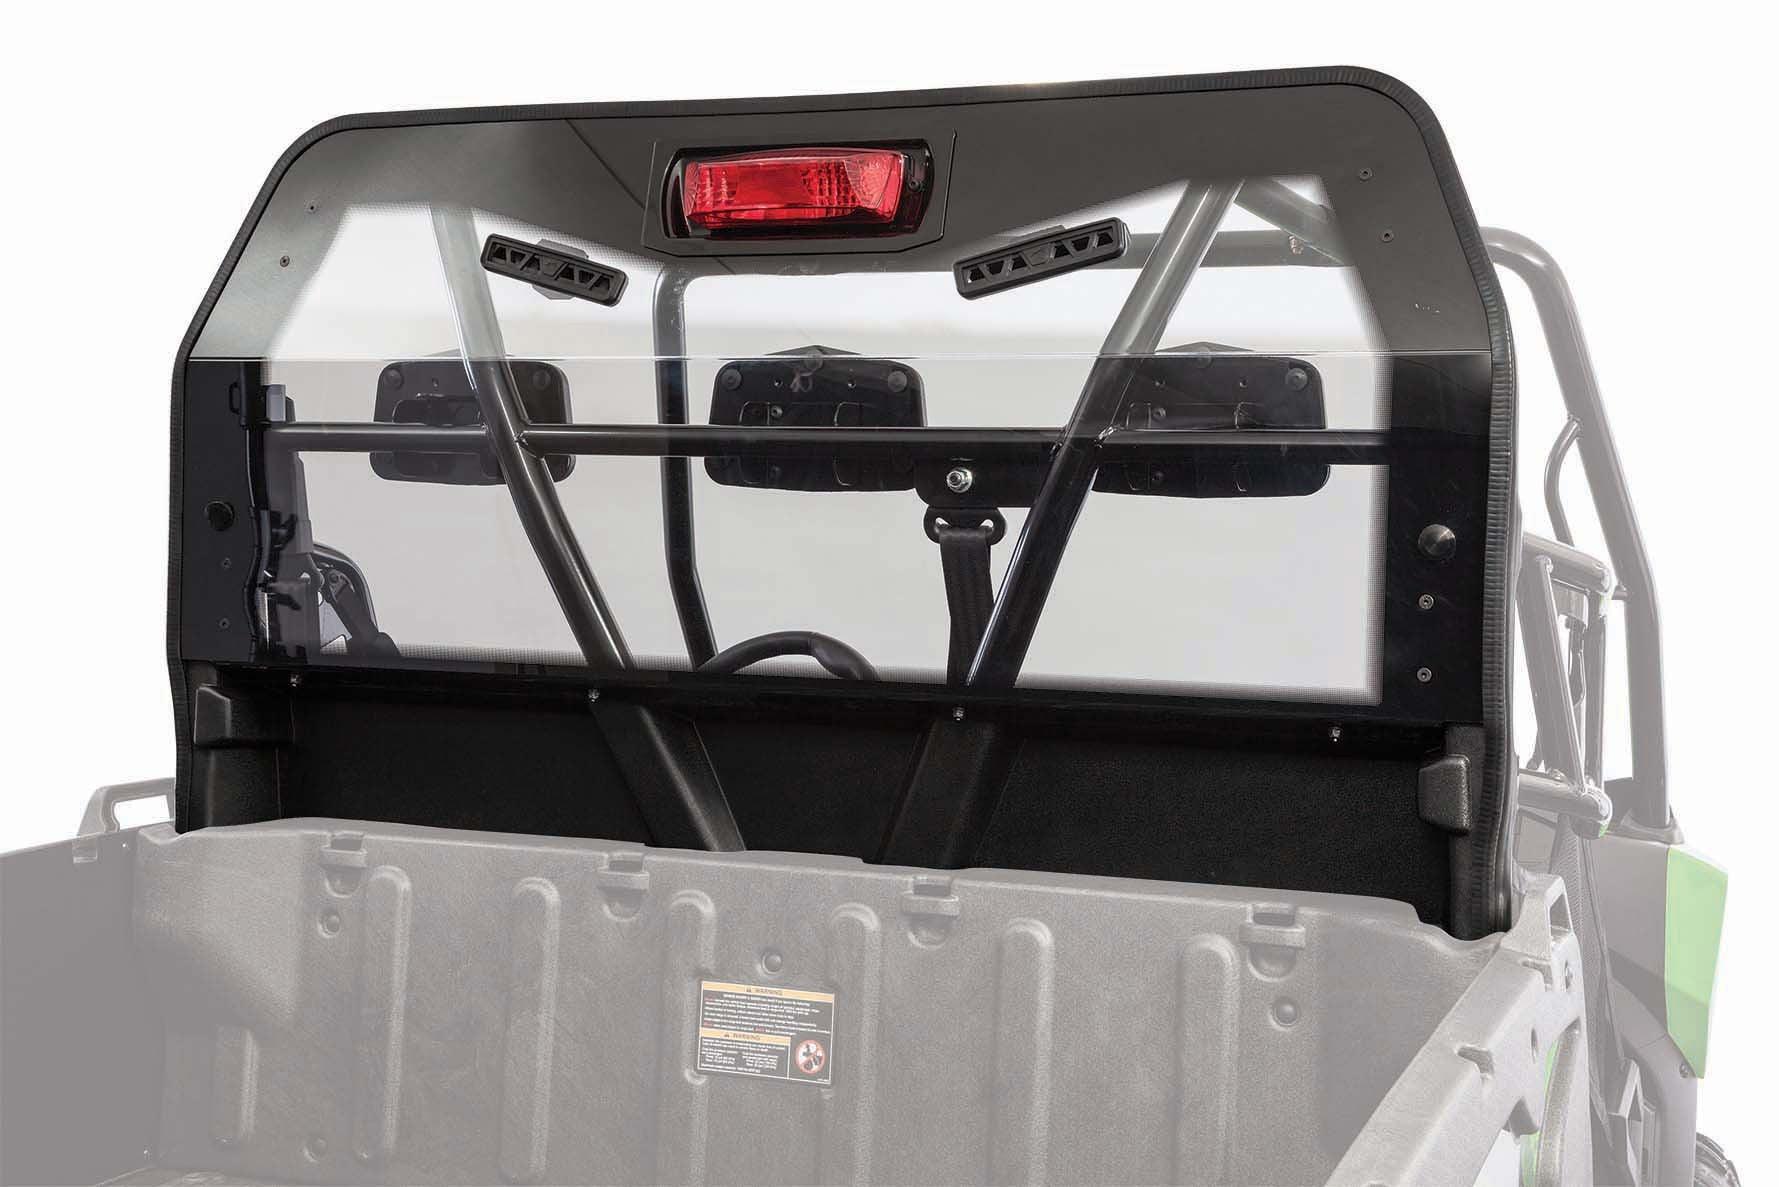 Prowler HDX Rear Panel - AWESOMEOFFROAD.COM